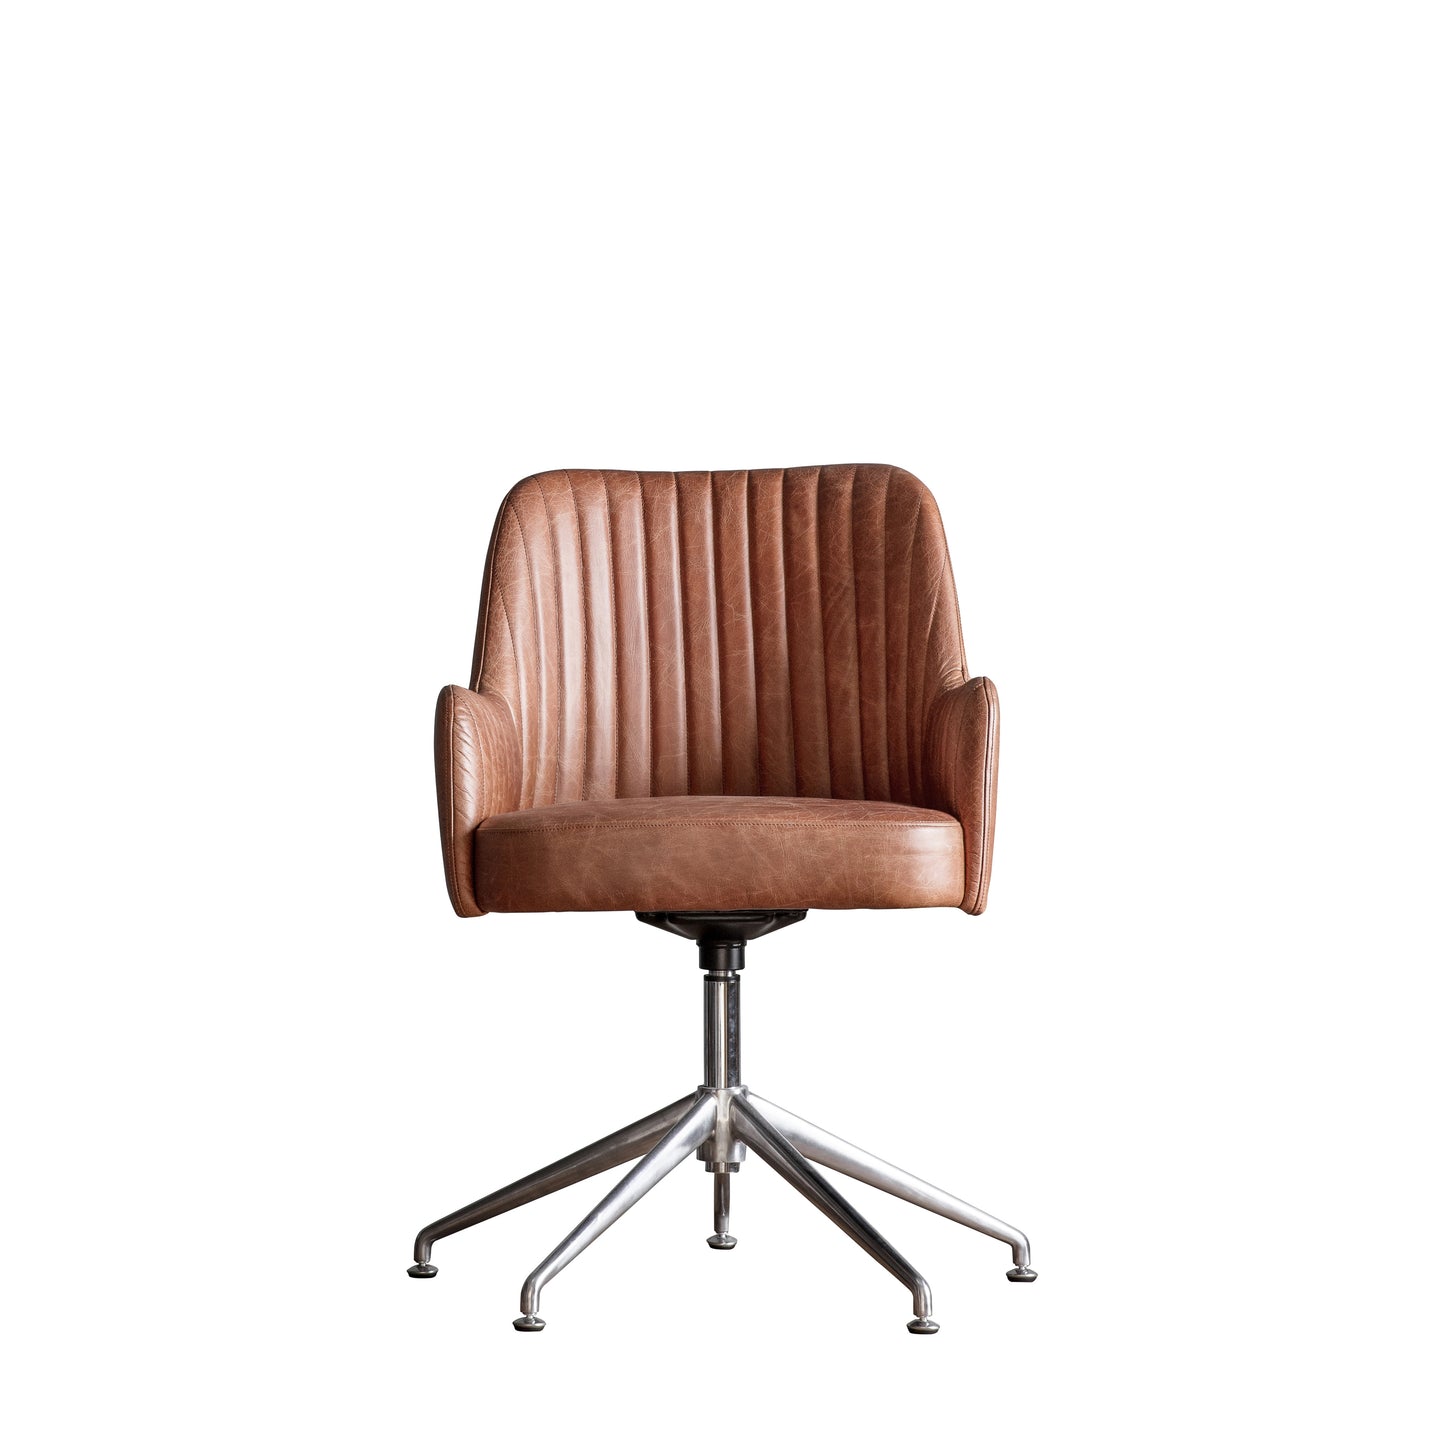 The Curie Swivel Chair in vintage brown leather is a stylish home furniture piece perfect for interior decor.